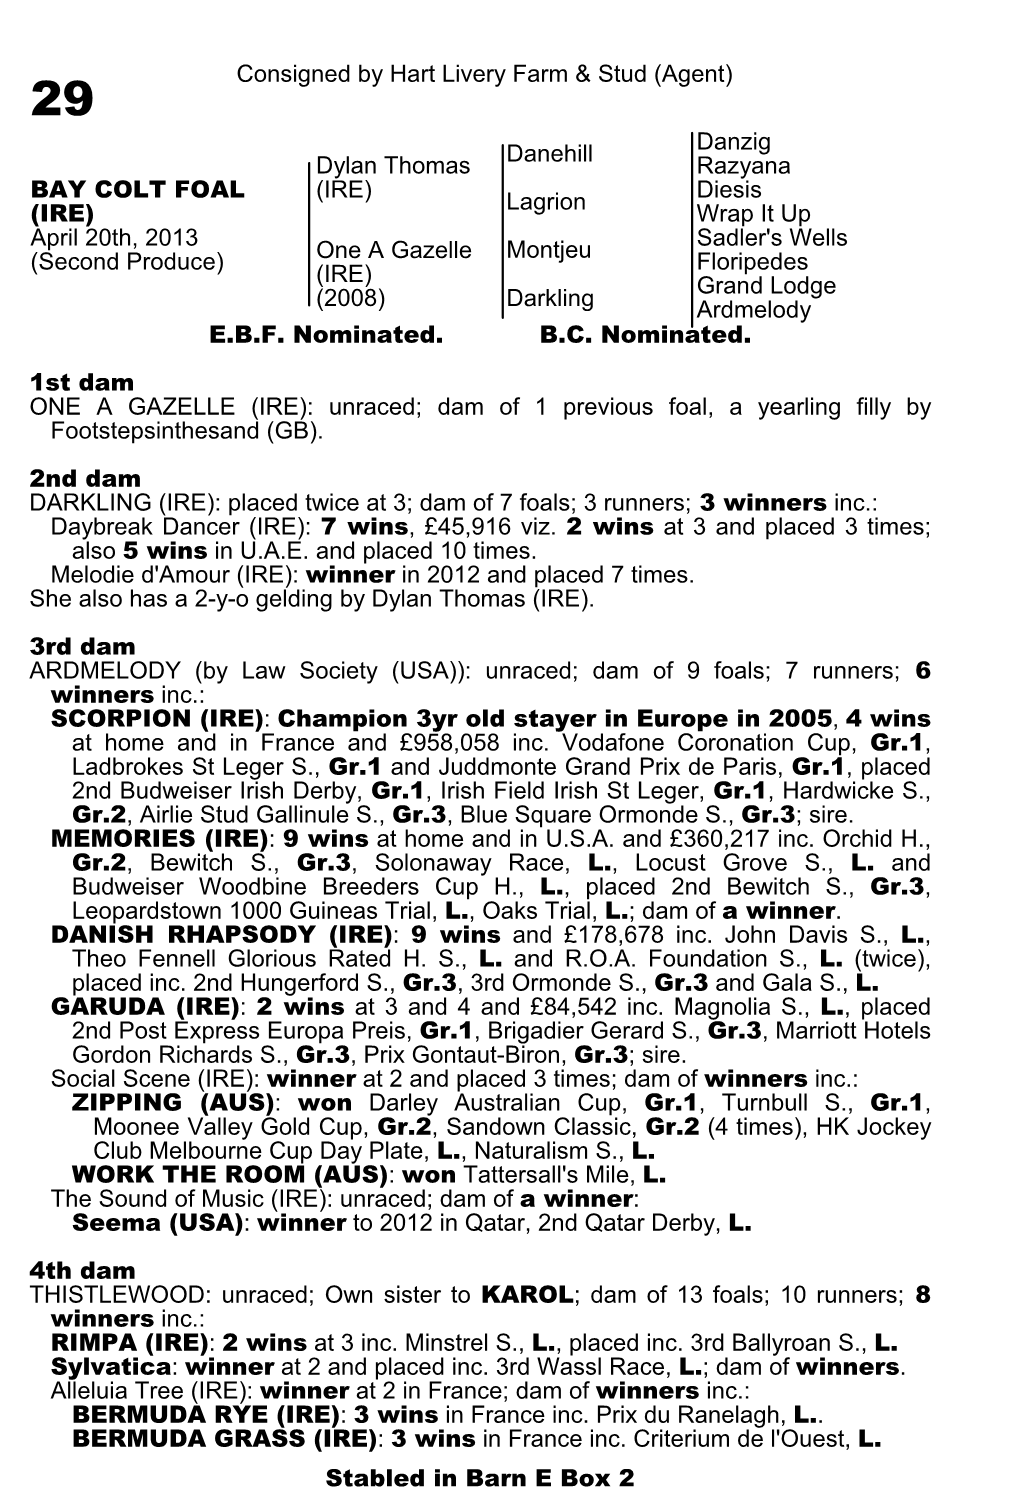 Consigned by Hart Livery Farm & Stud (Agent) Danehill Danzig Razyana Dylan Thomas (IRE) Lagrion Diesis Wrap It up Montjeu Sa